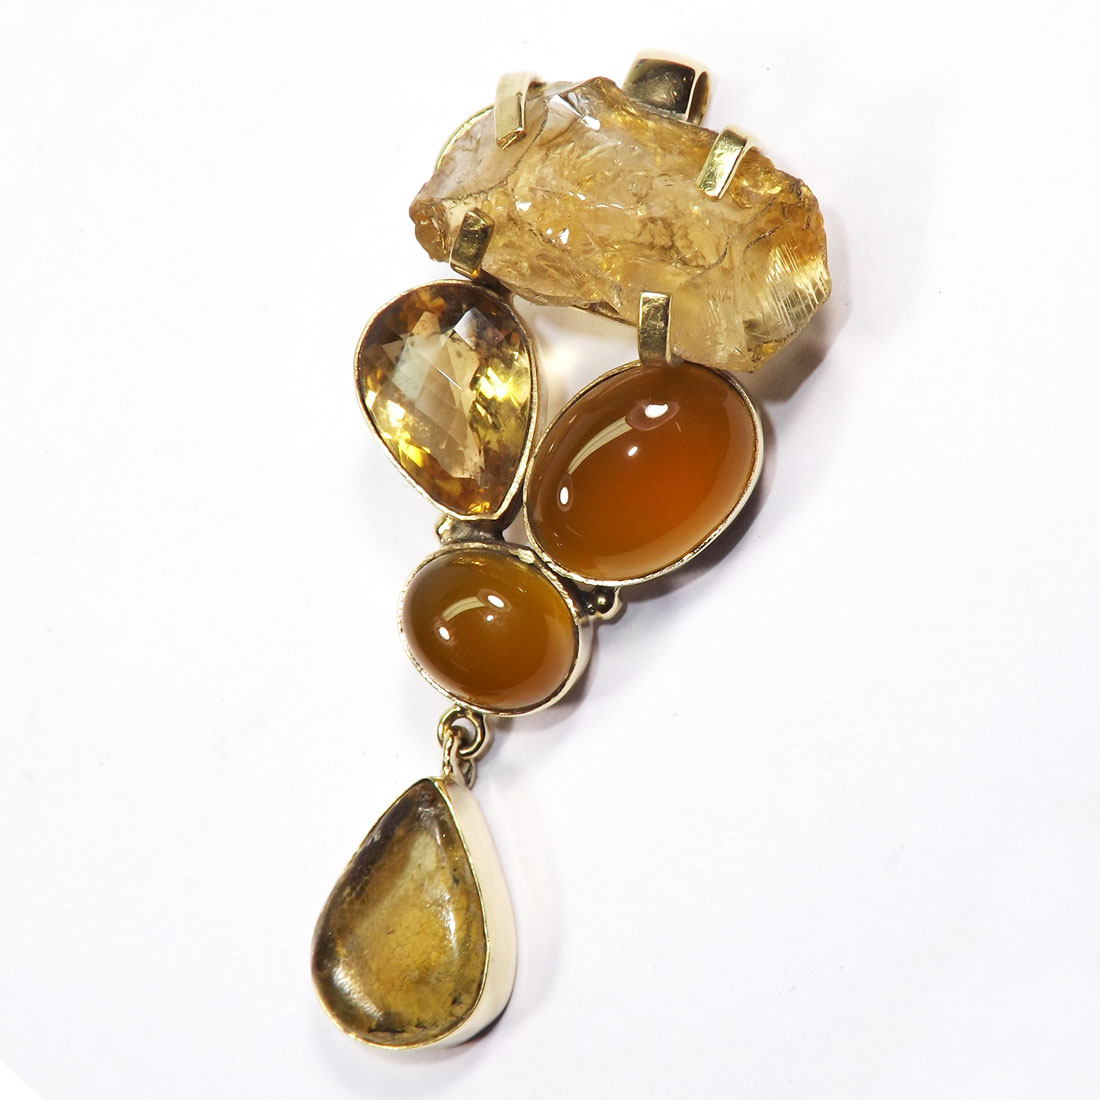 Citrine Rough and Cut Yellow Onyx Amber A - CKP996-Mix Cut Cab Rough Gemstone Made in Brass Chunky Pendants